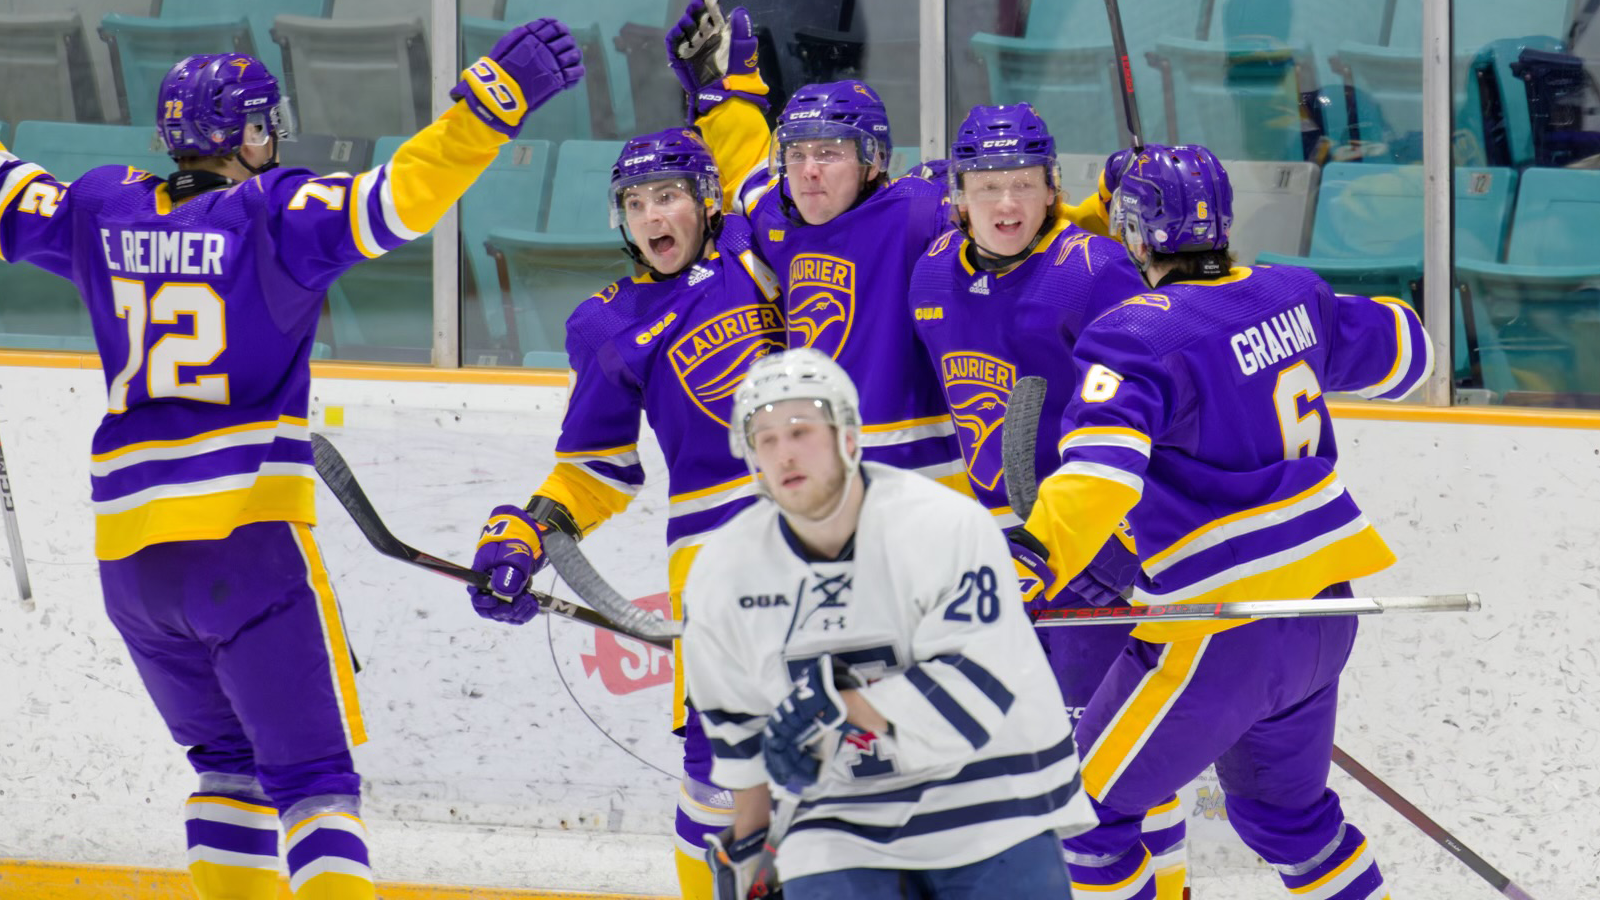 Five members of the Laurier men's hockey team celebrating a goal on the ice